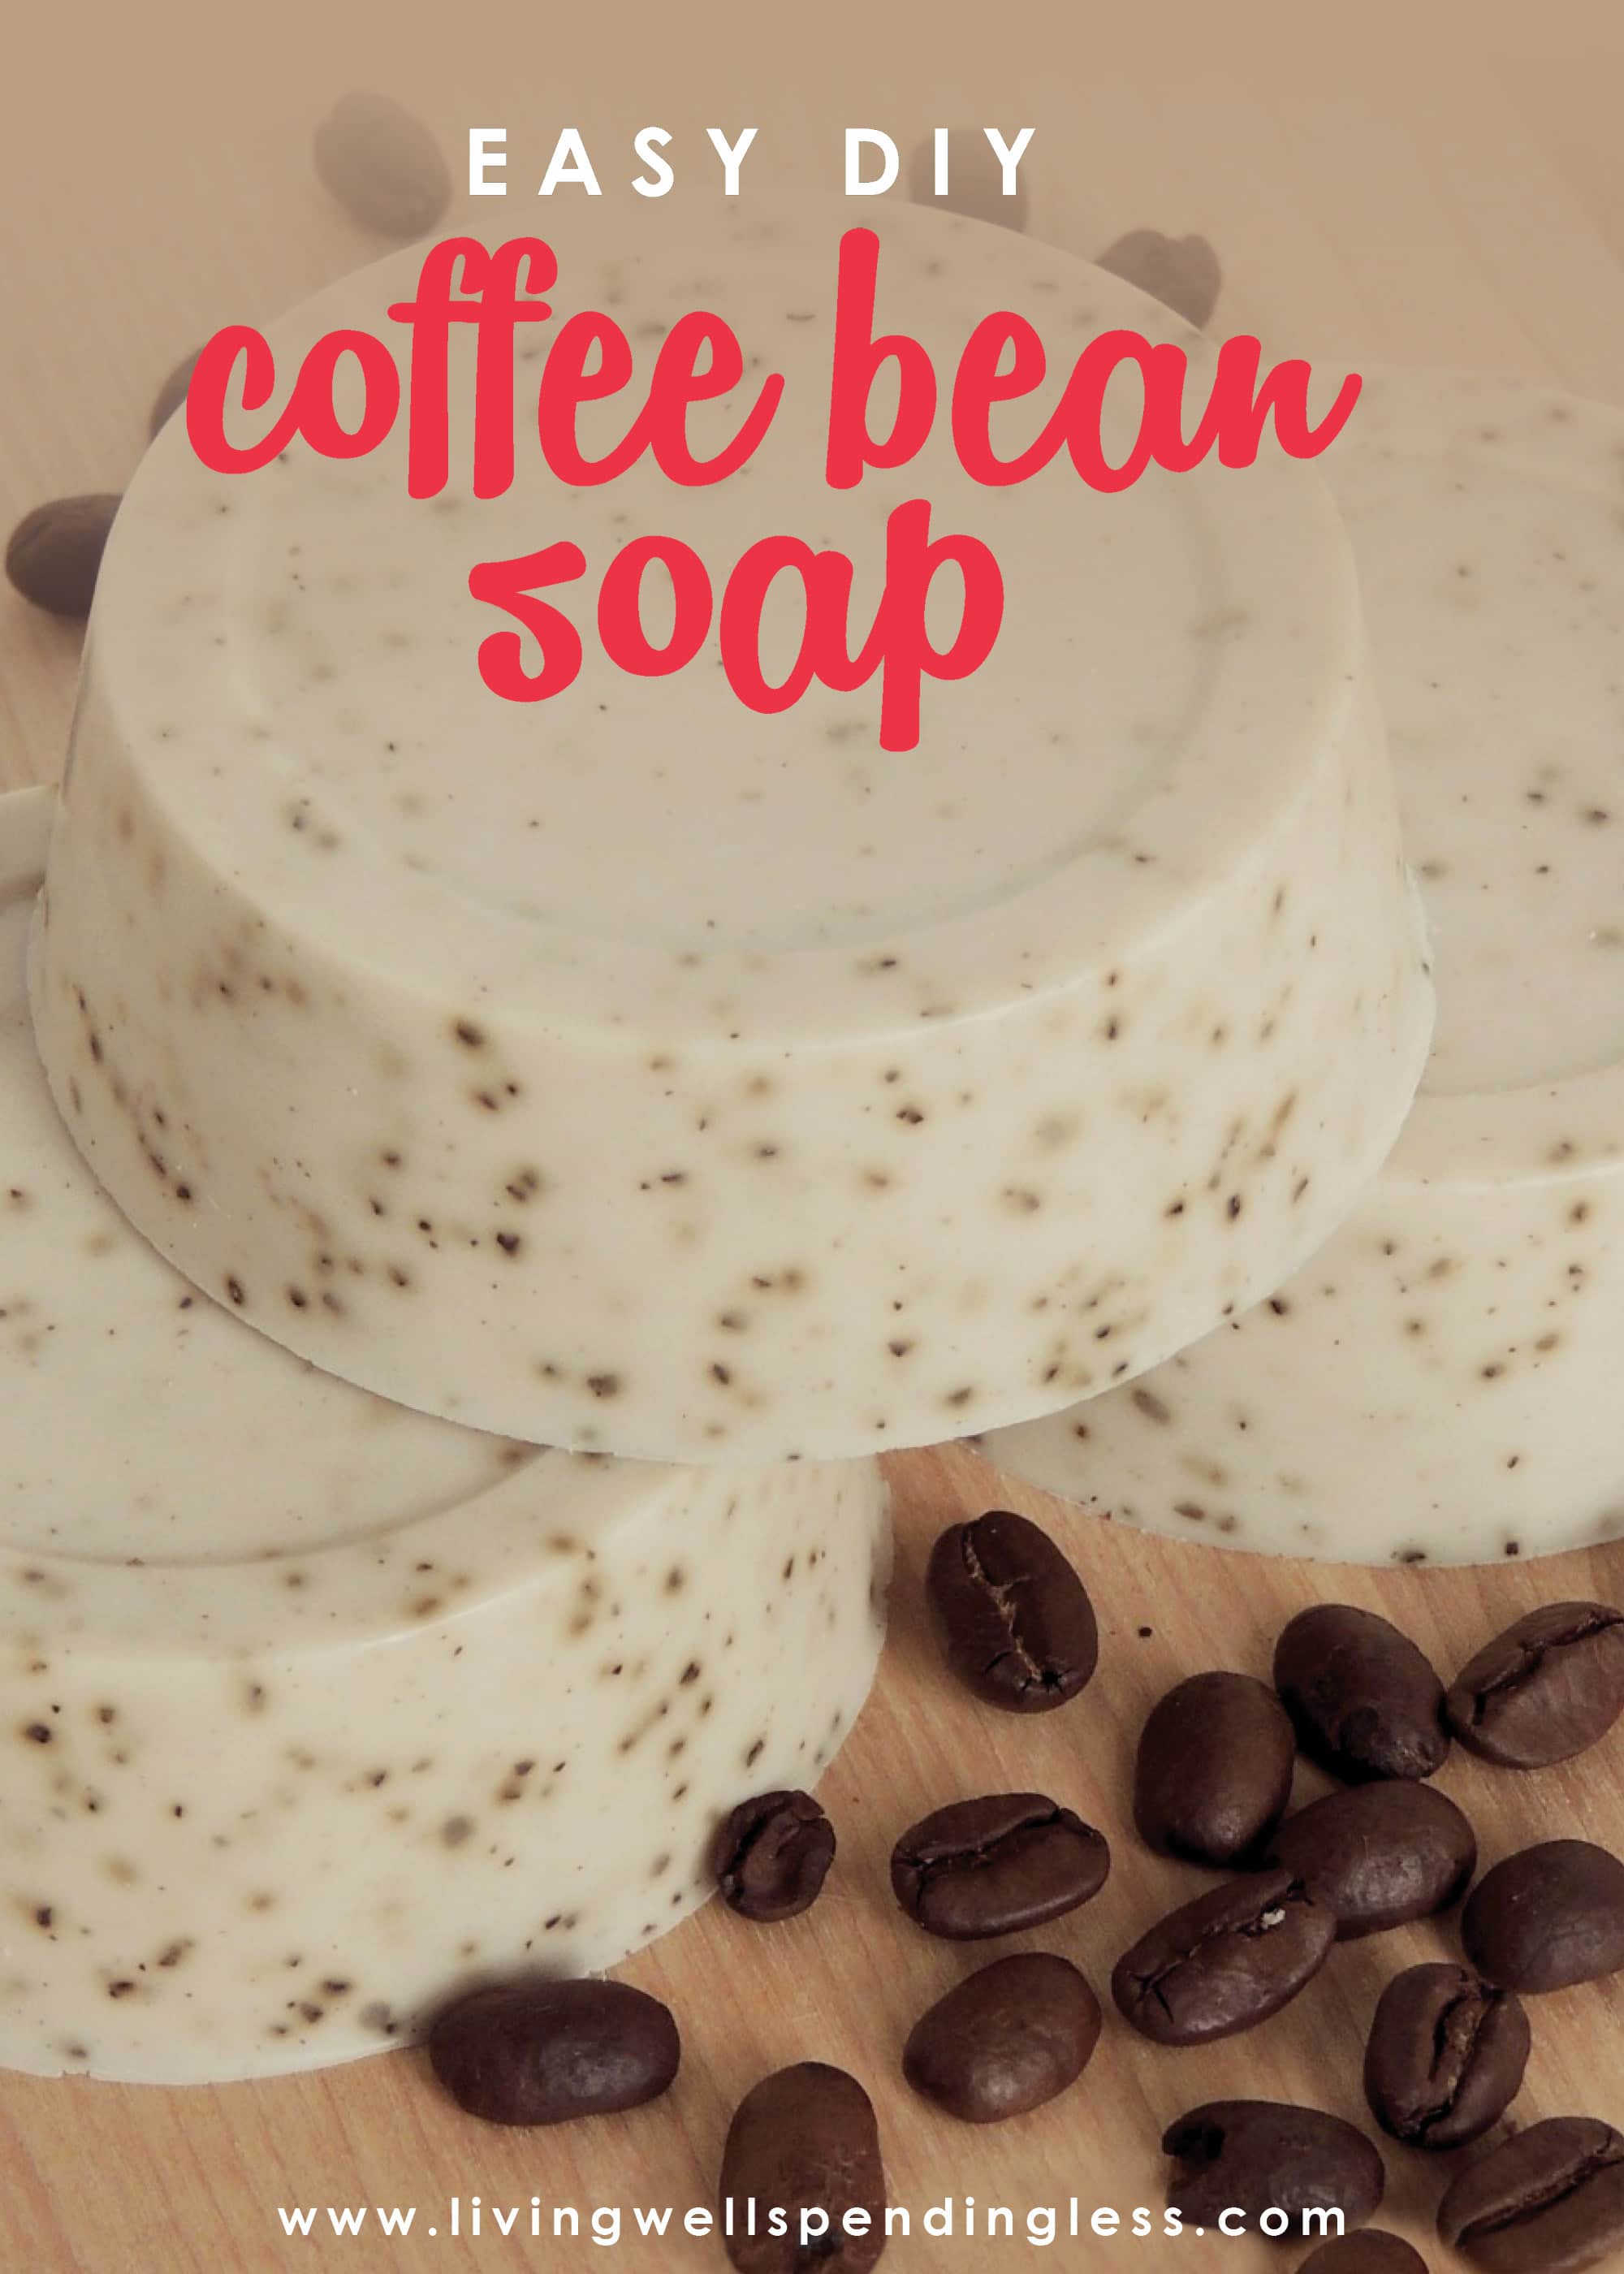 Mmmmm....cofffee....You won't believe how easy it is to whip up this luscious homemade coffee bean soap--just 3 ingredients and 15 minutes is all you need! A perfect gift for the coffee lover in your life, or just a great way to start your day!